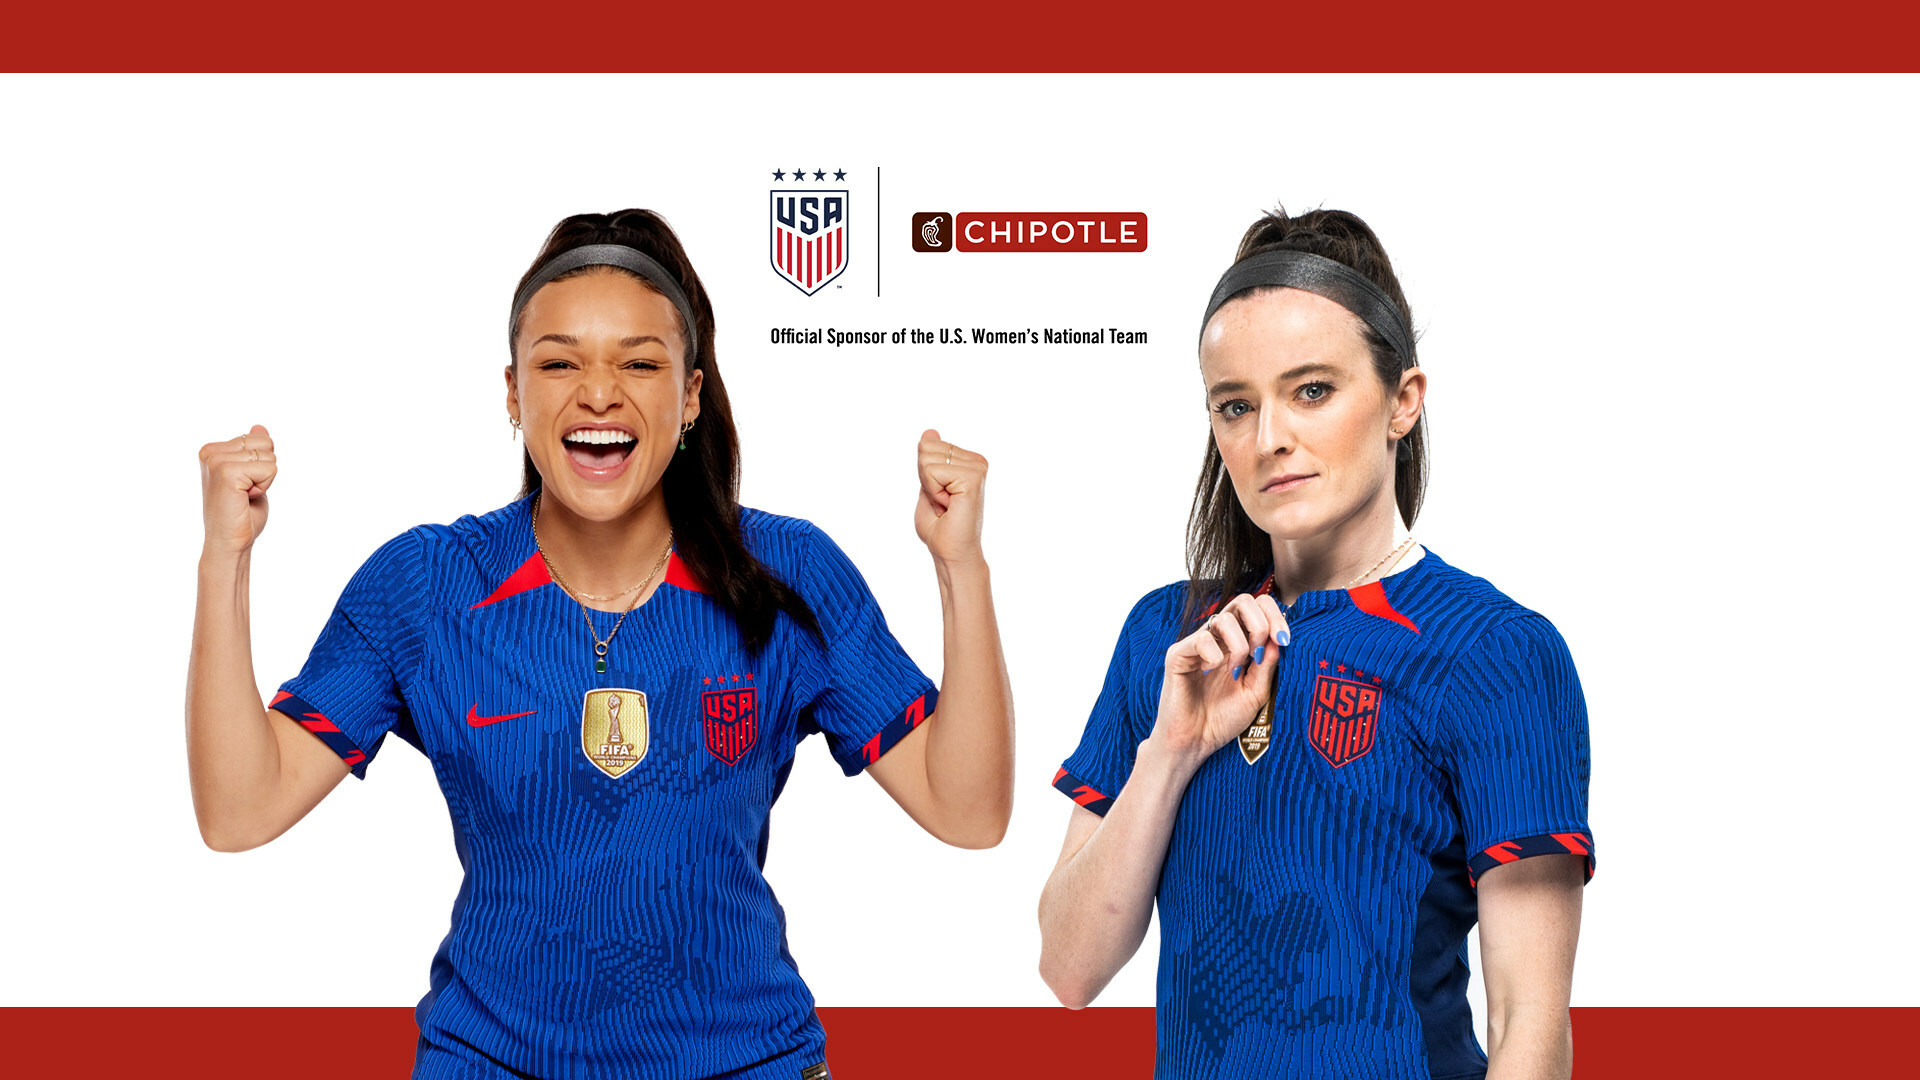 Soccer.com Signed USWNT Home Jersey Giveaway